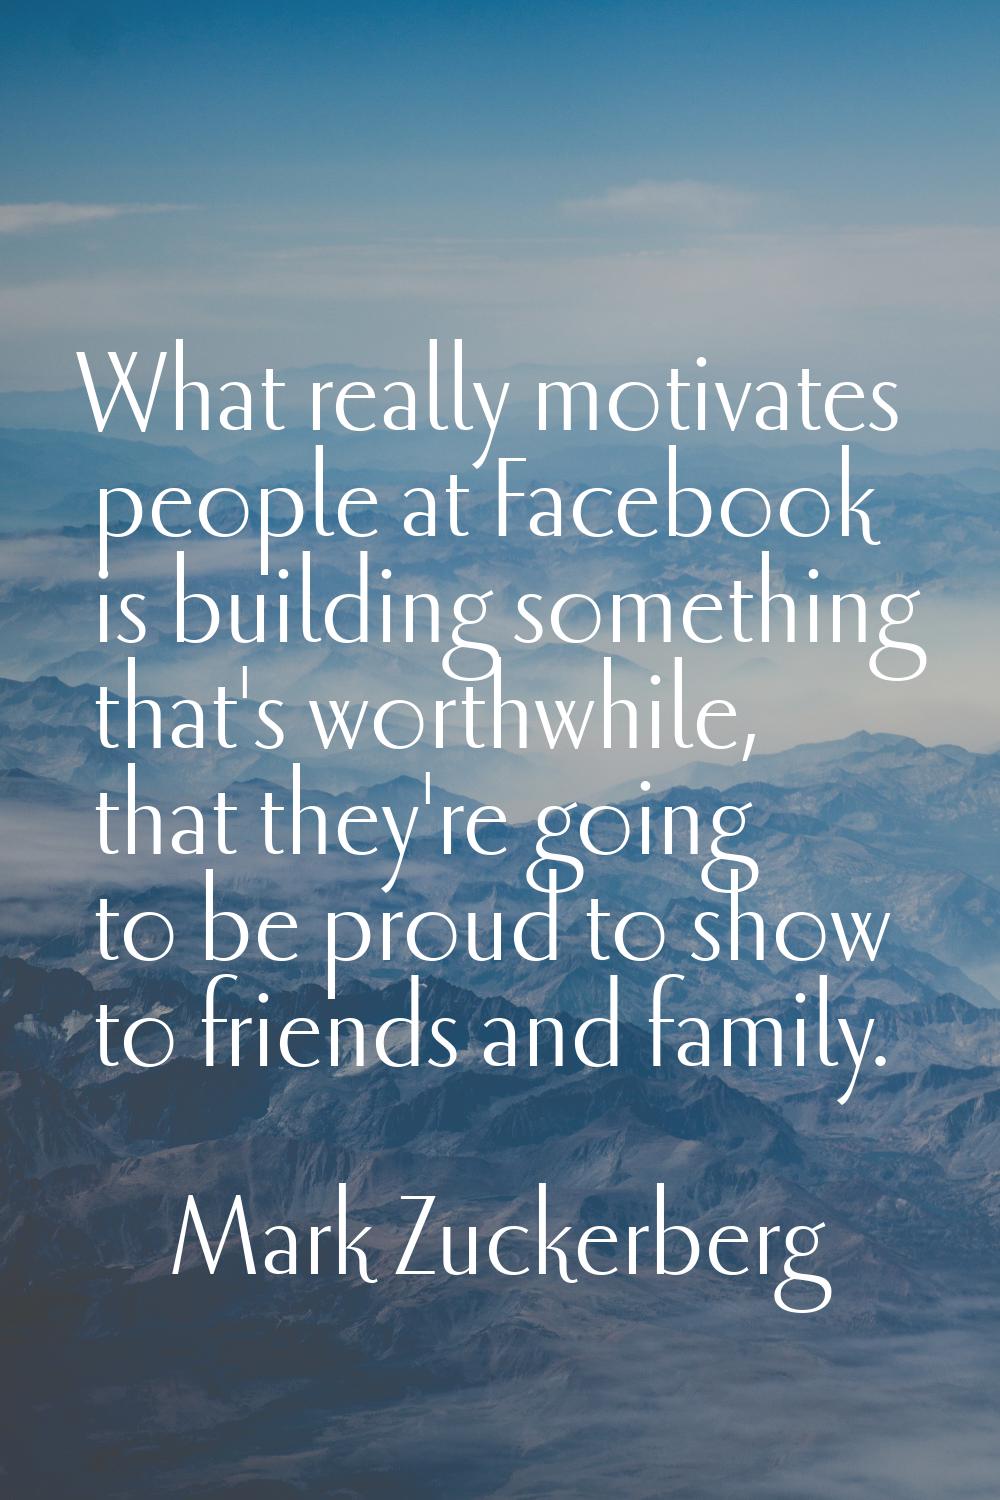 What really motivates people at Facebook is building something that's worthwhile, that they're goin